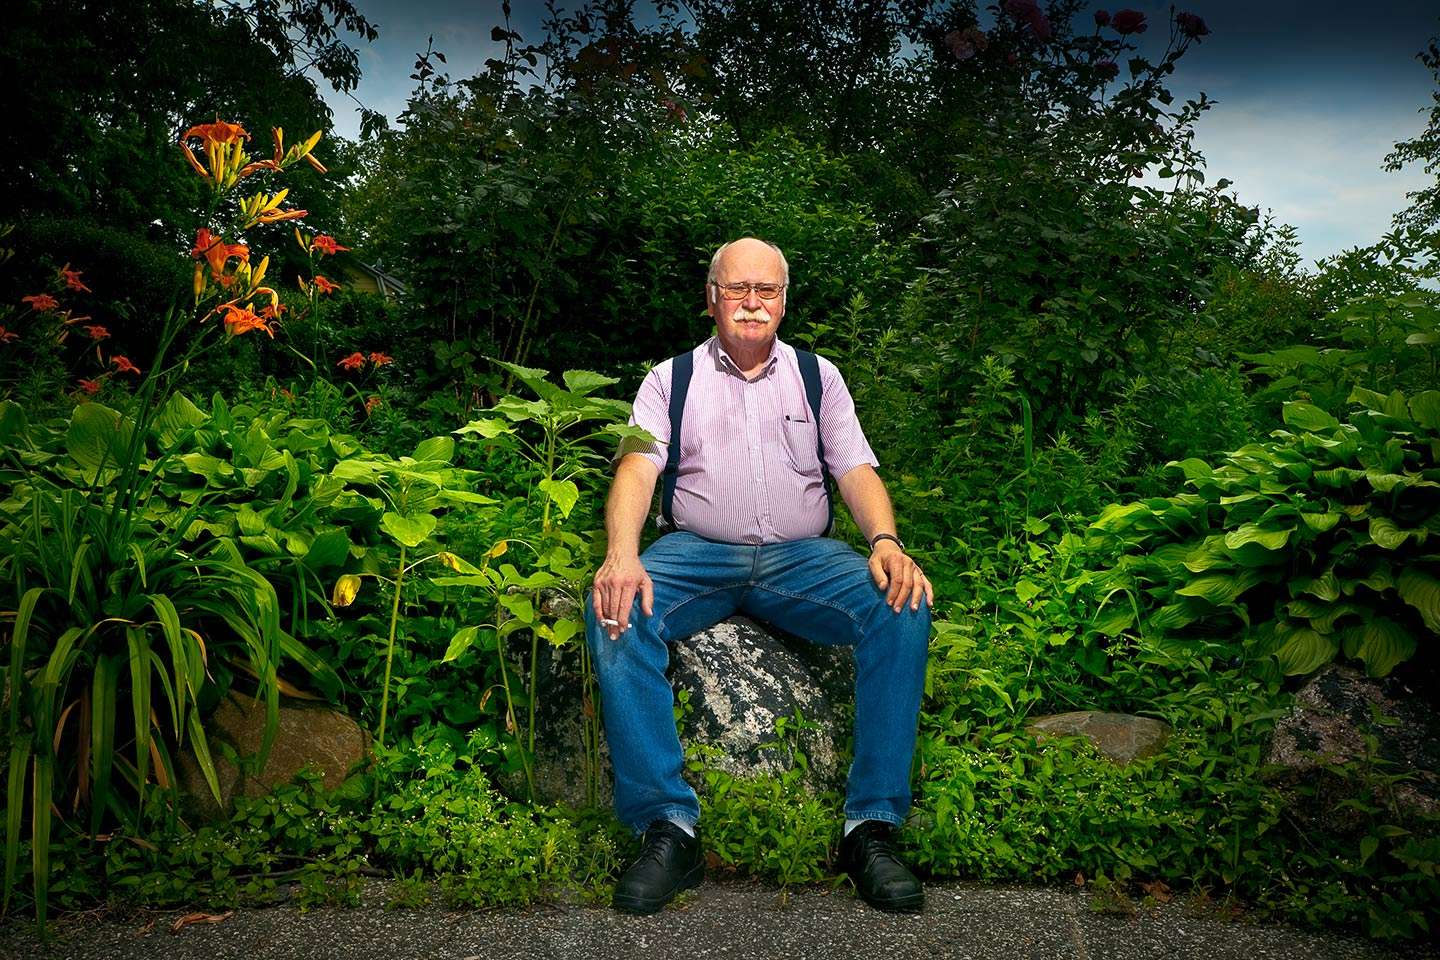 Organic farming in the Bronx.  Bissel Gardens is 5 city blocks converted into organic farming feeding individuals, low income, and homeless shelters.  Russ Lecount is one  of the founders and organizers. : Portraits : New York City based photographer and video specializing in portrait corporate portraits, video, editorial stories for on location and architectural photography